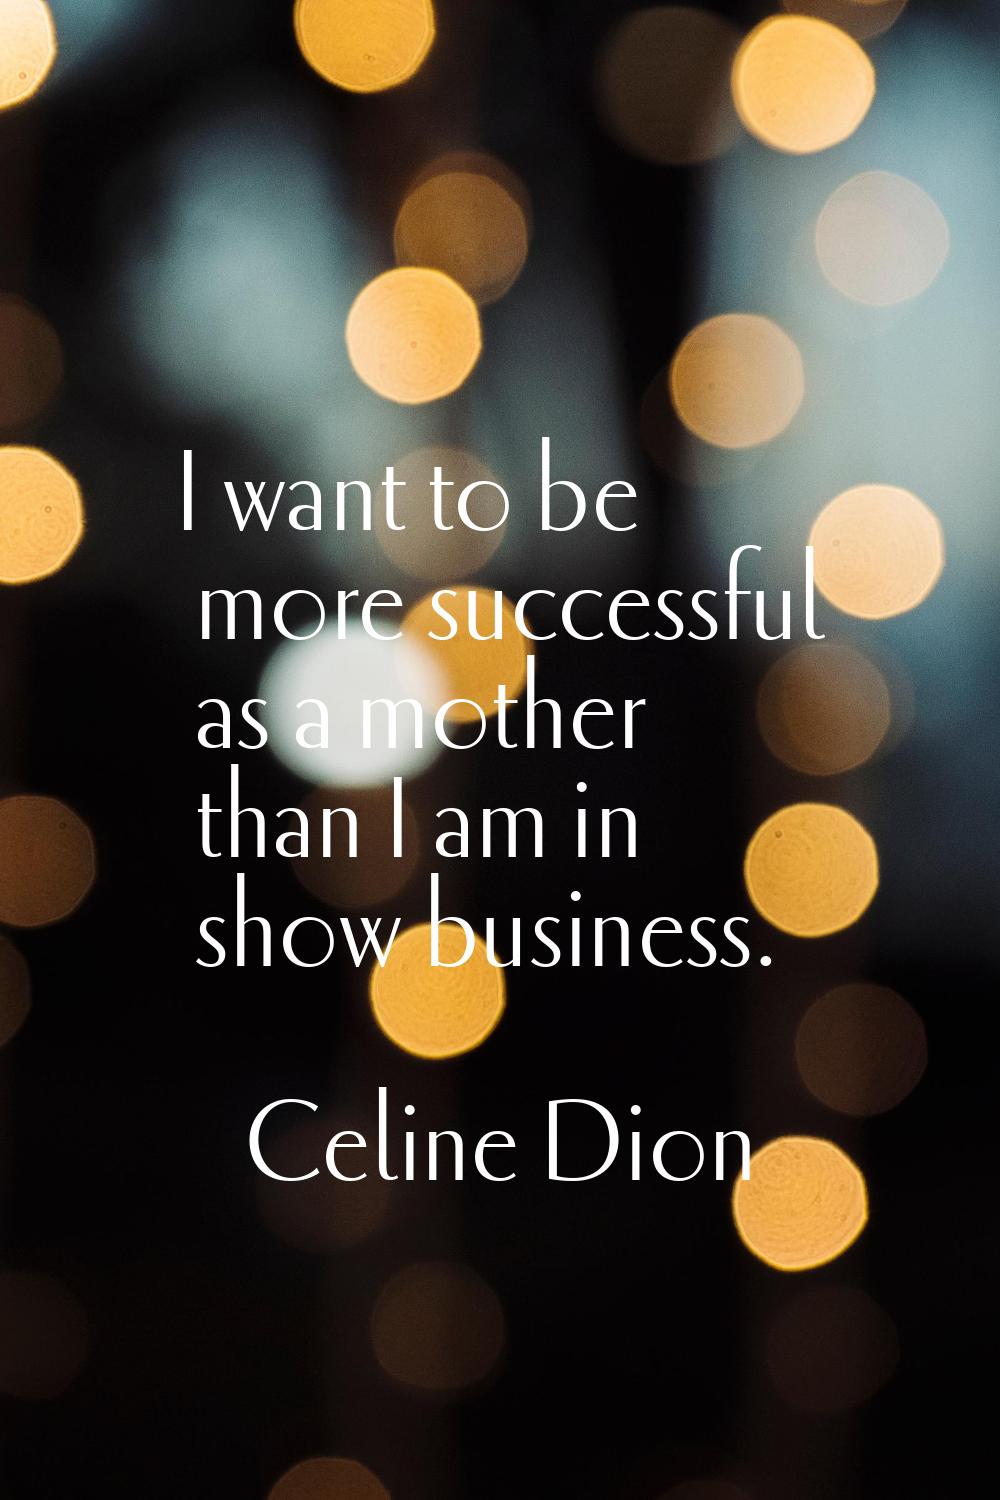 I want to be more successful as a mother than I am in show business.